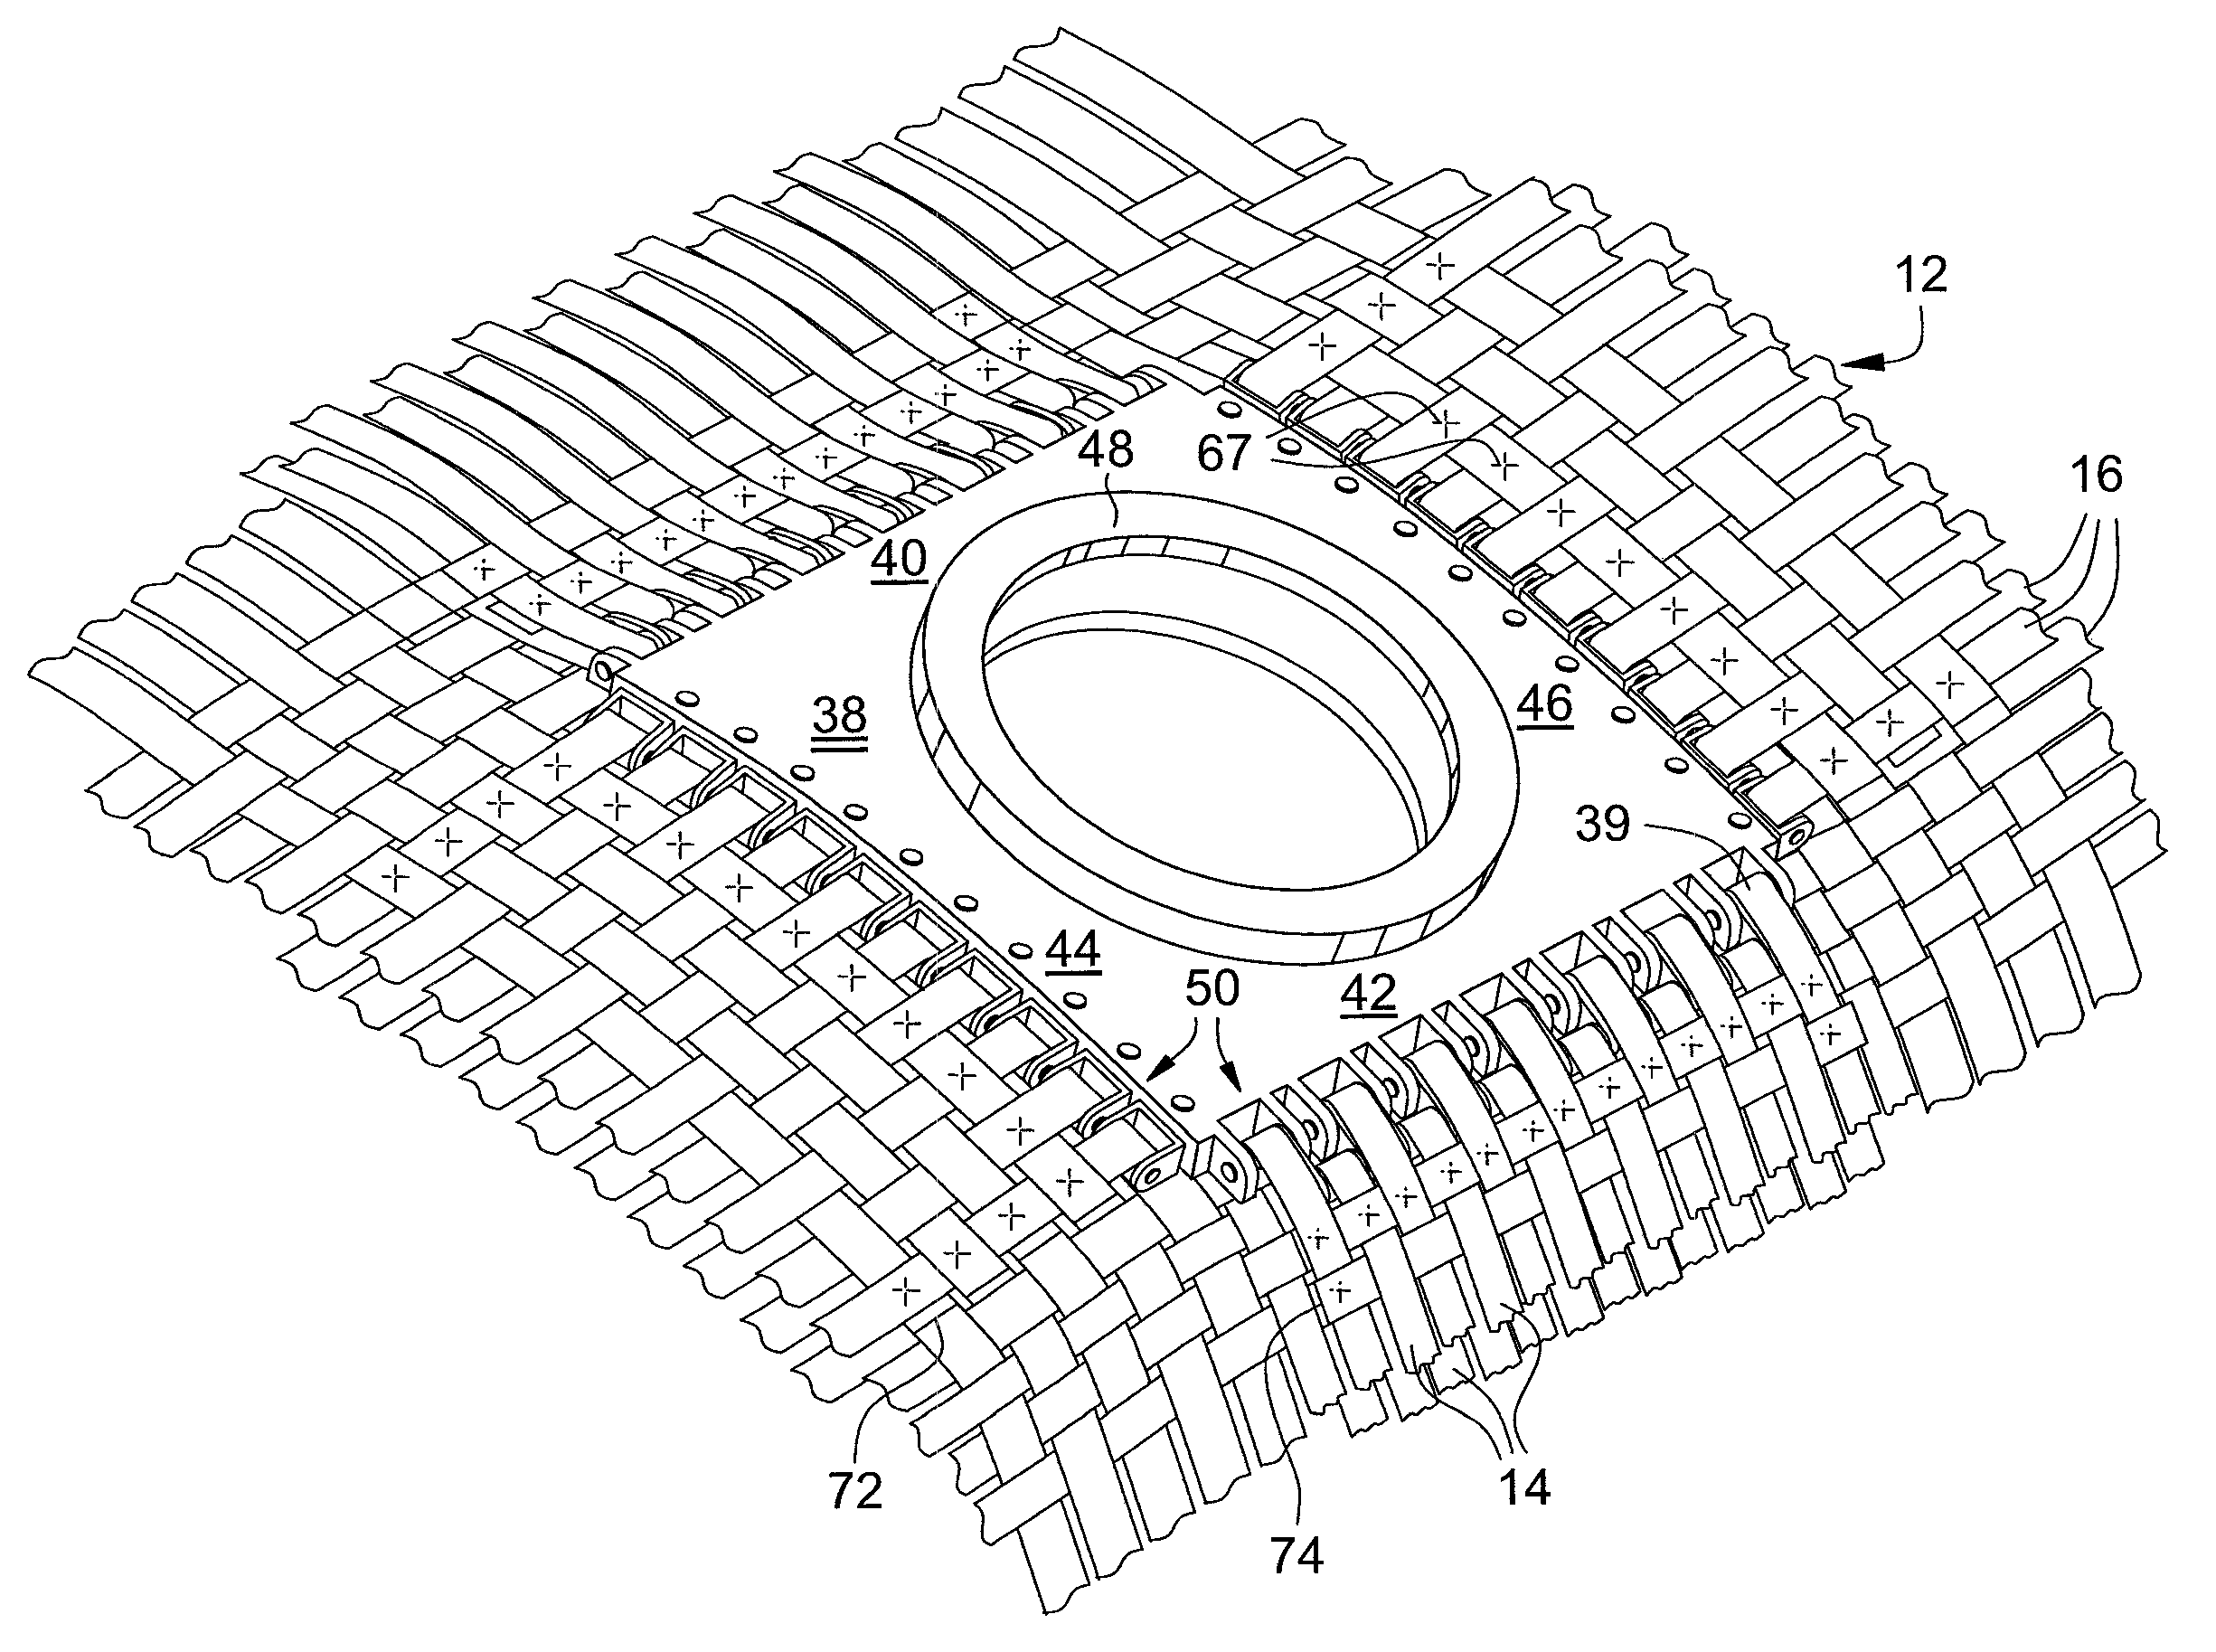 Apparatus for integrating a rigid structure into a flexible wall of an inflatable structure